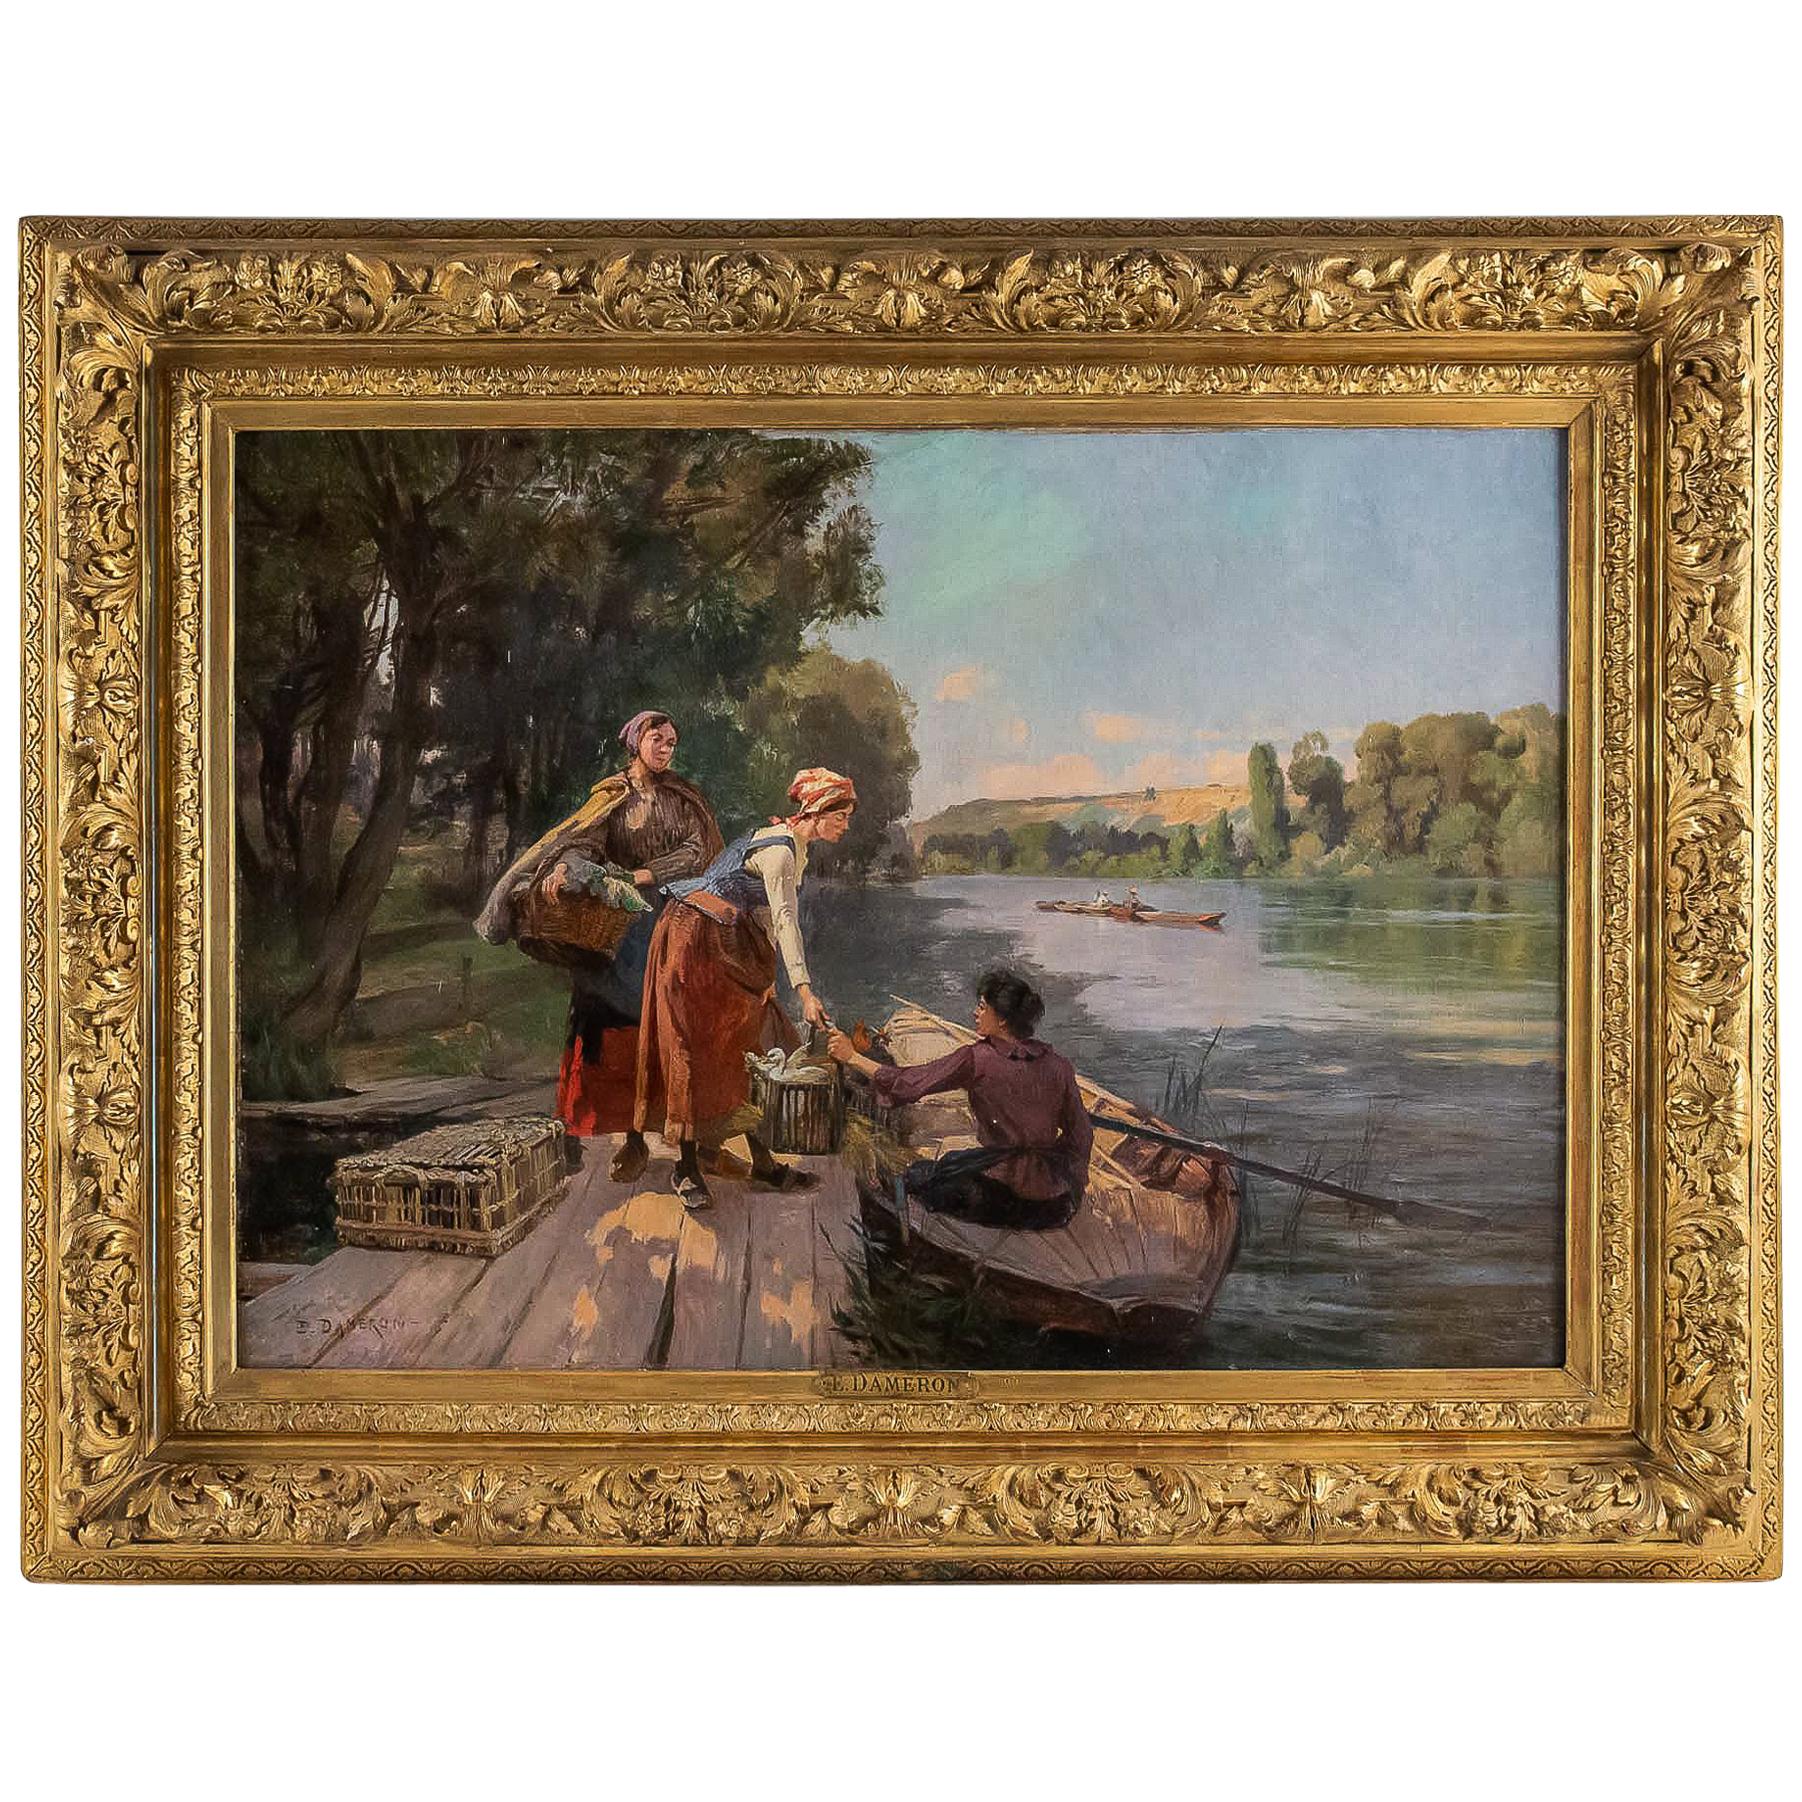 Dameron Emile-Charles Oil on Canvas, the Merchants on the River-Banks circa 1880